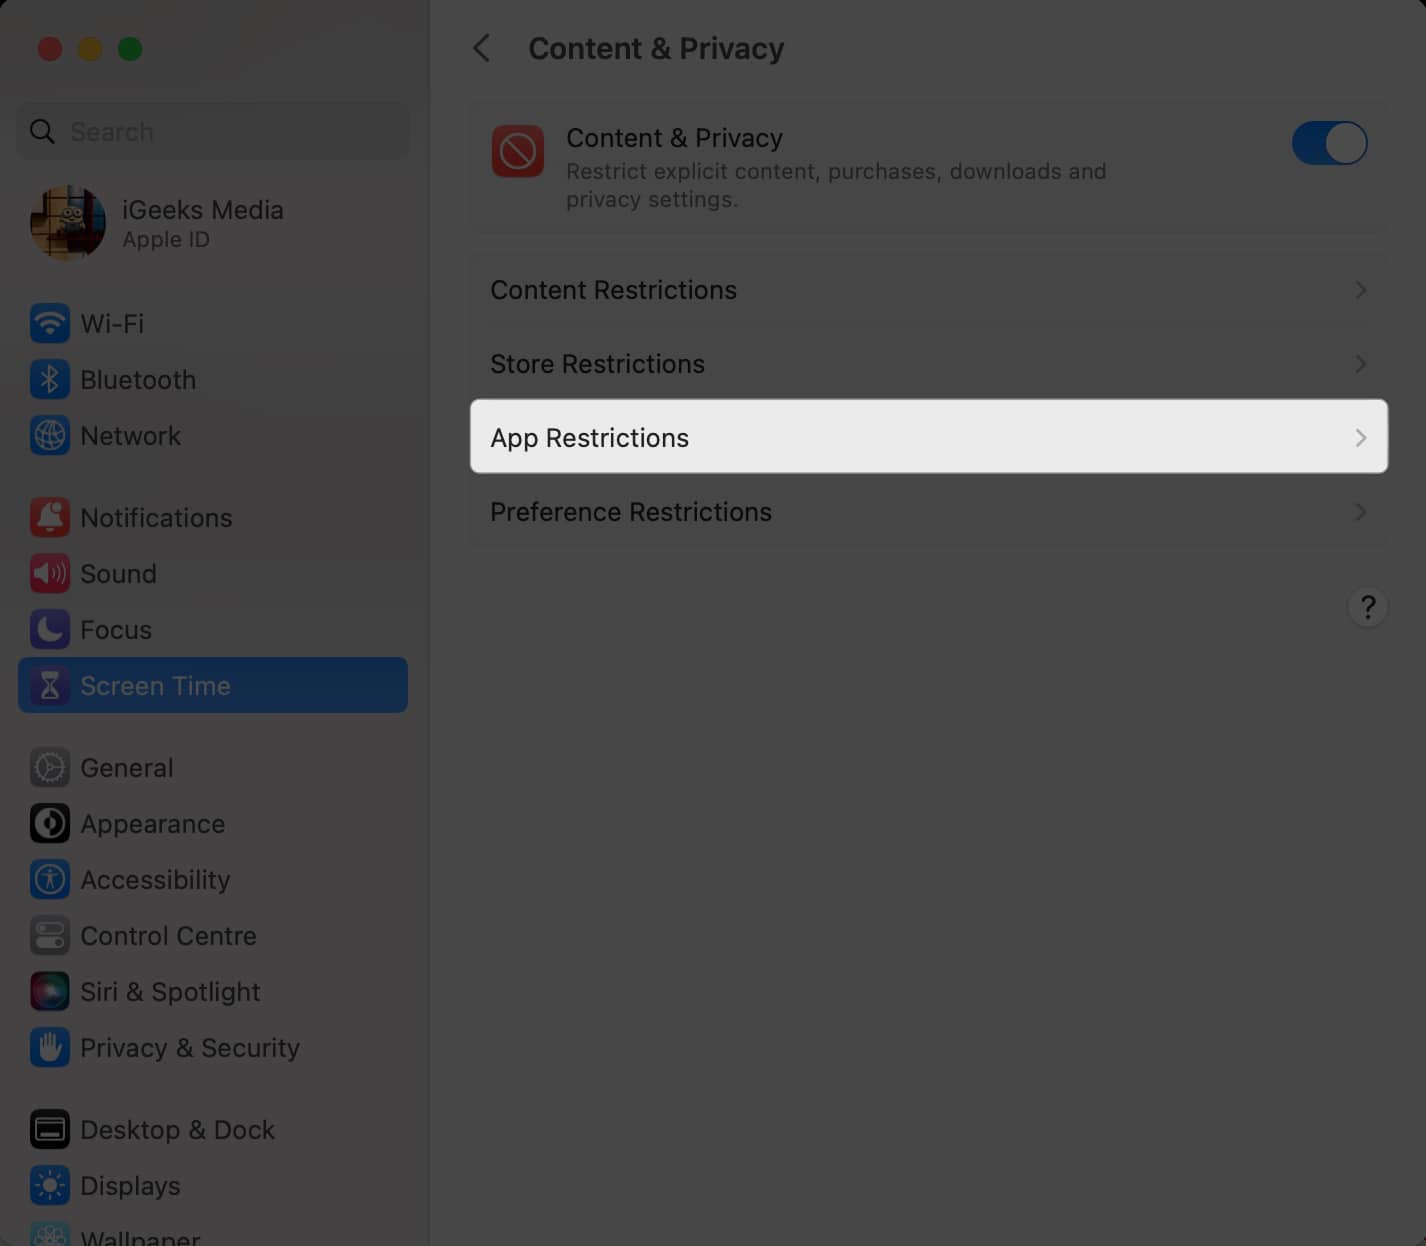 Select App Restrictions